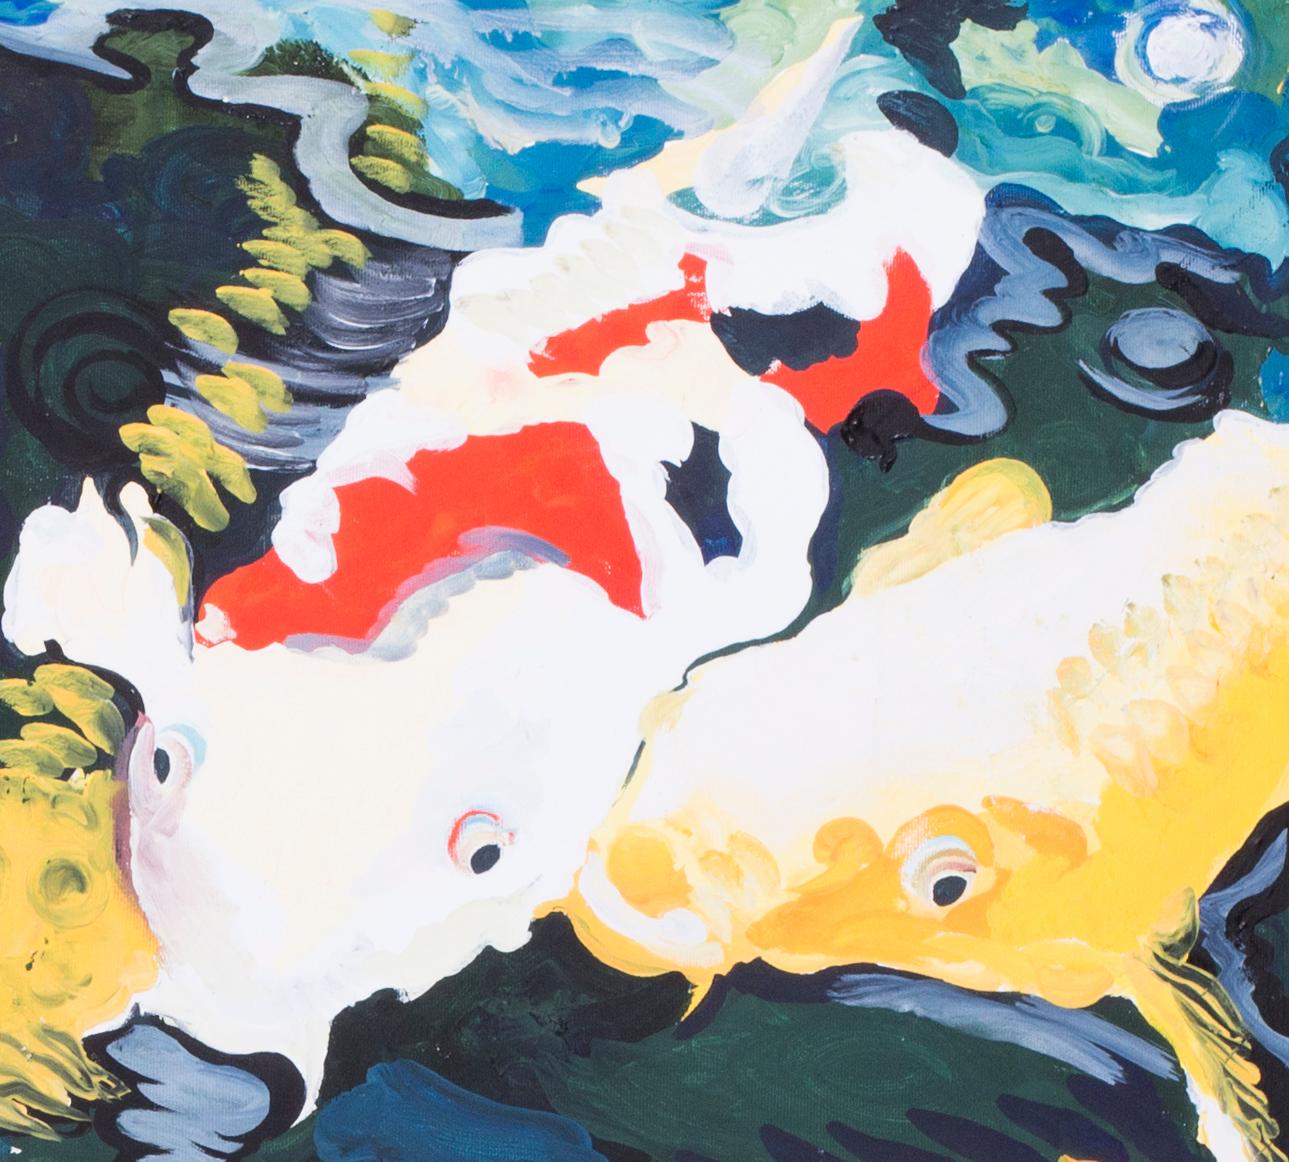 Koi carp at feeding time - Painting by Clive Fredriksson